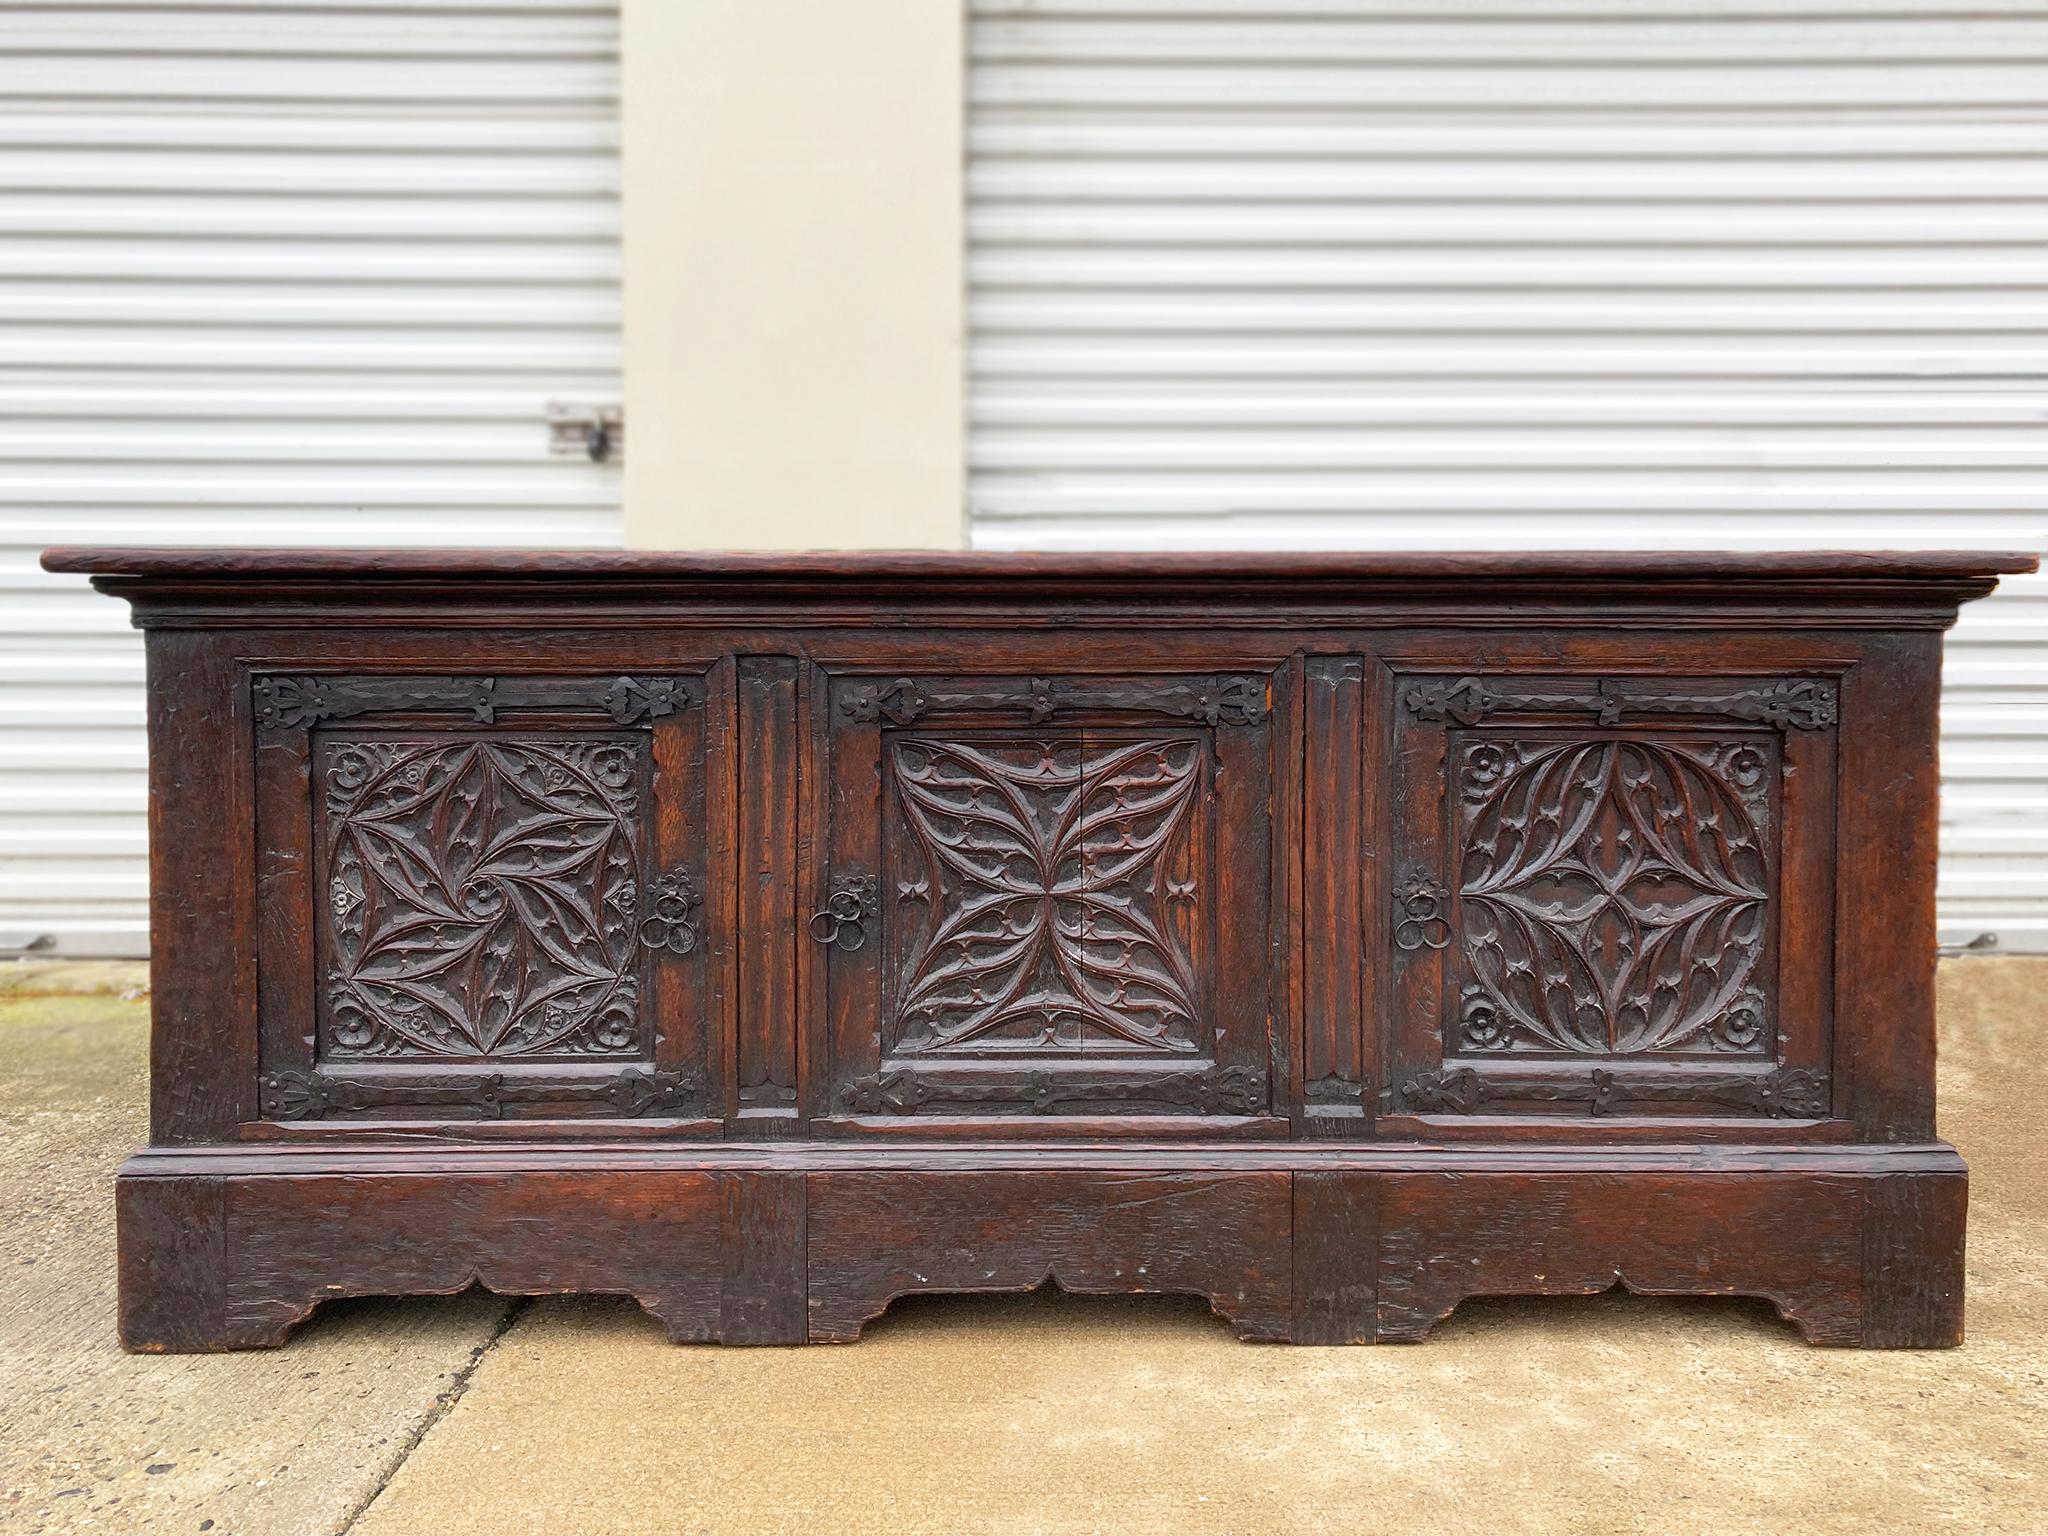 18th century English coffer trunk, handcrafted from oak. Front panels feature ornate, hand-carved floral and geometric designs. The wood has a warm red tone and has aged beautifully. The iron hinges of the lid are a later